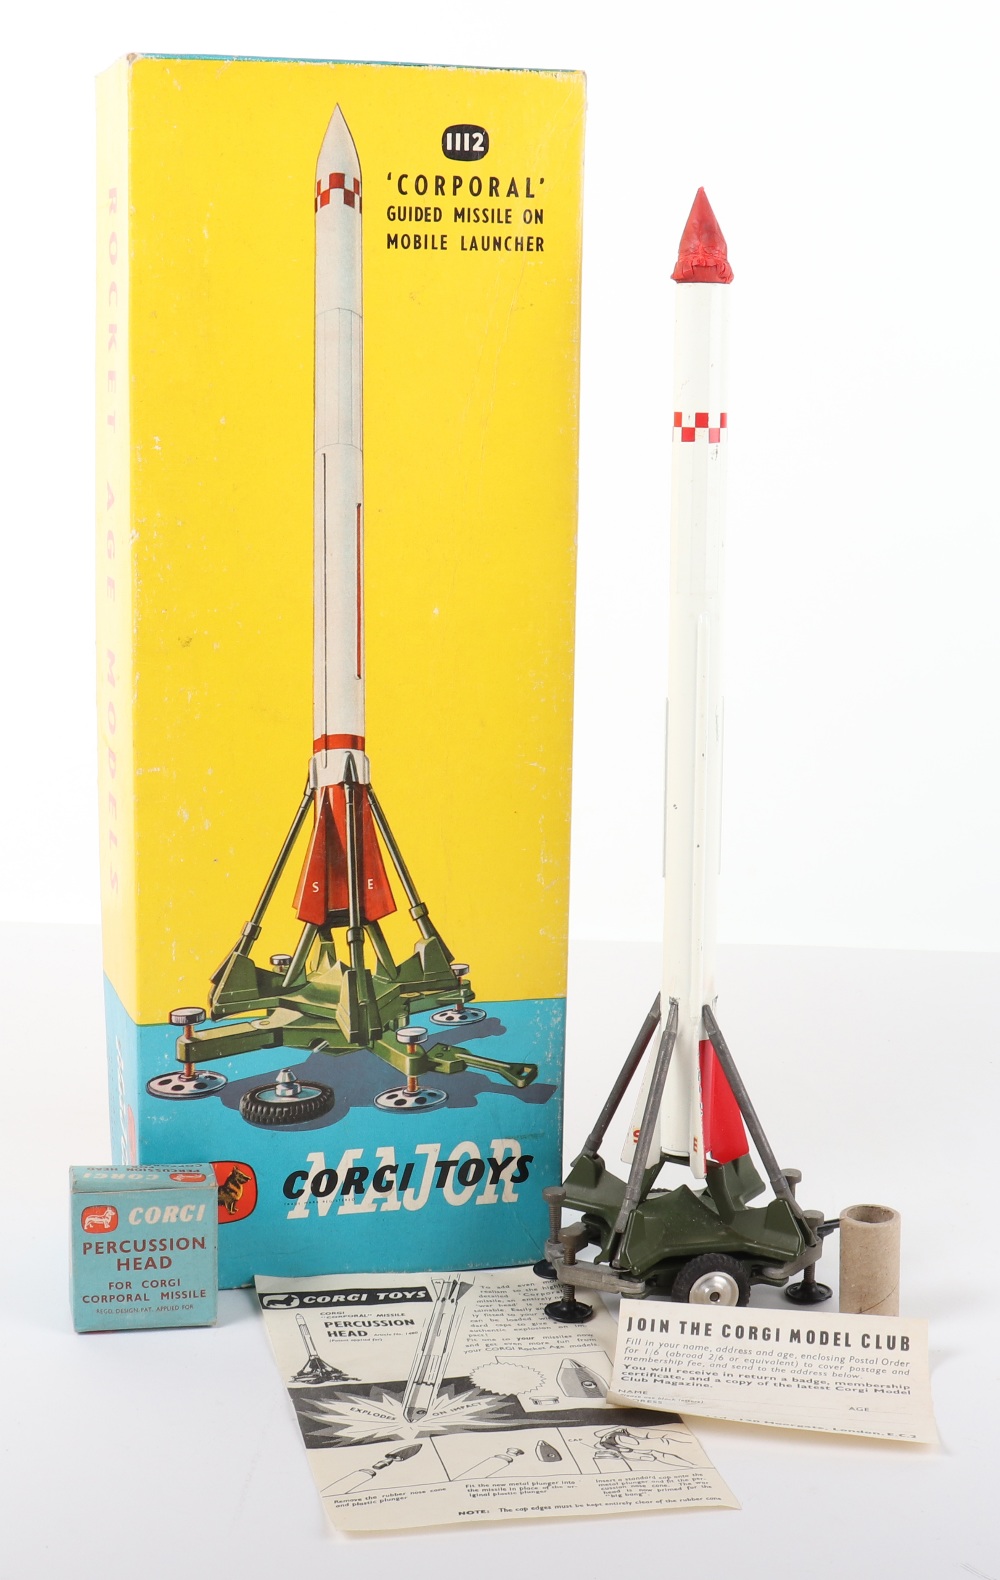 Corgi Major Toys Boxed 1112 ‘Corporal’ Guided Missile on Mobile Launcher - Image 3 of 3